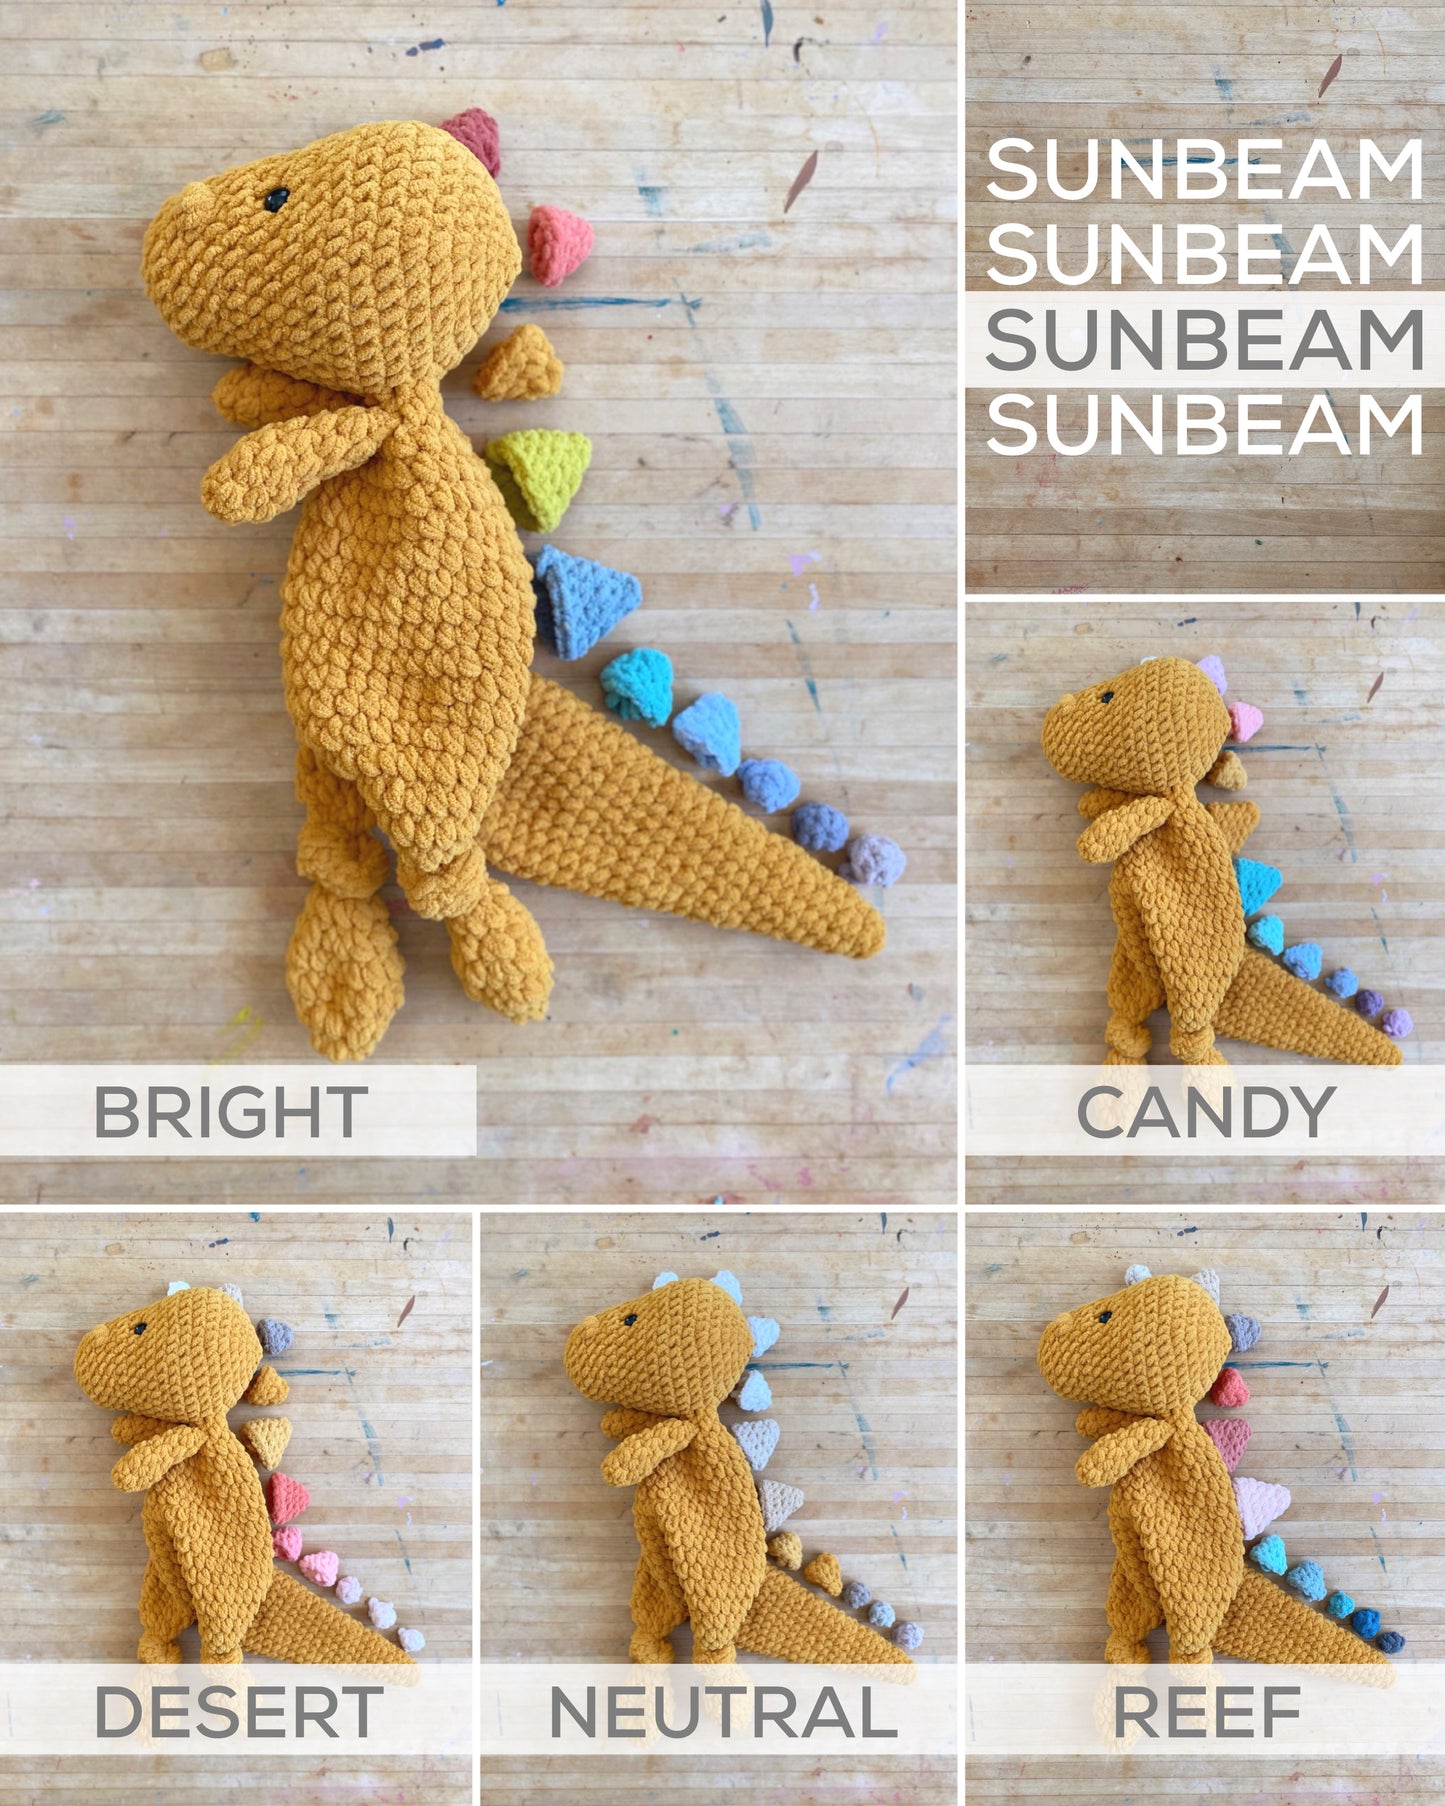 Triple Triceratops Knotted Lovey — PATTERN MODIFICATION (Please read l – Mama  Made Minis